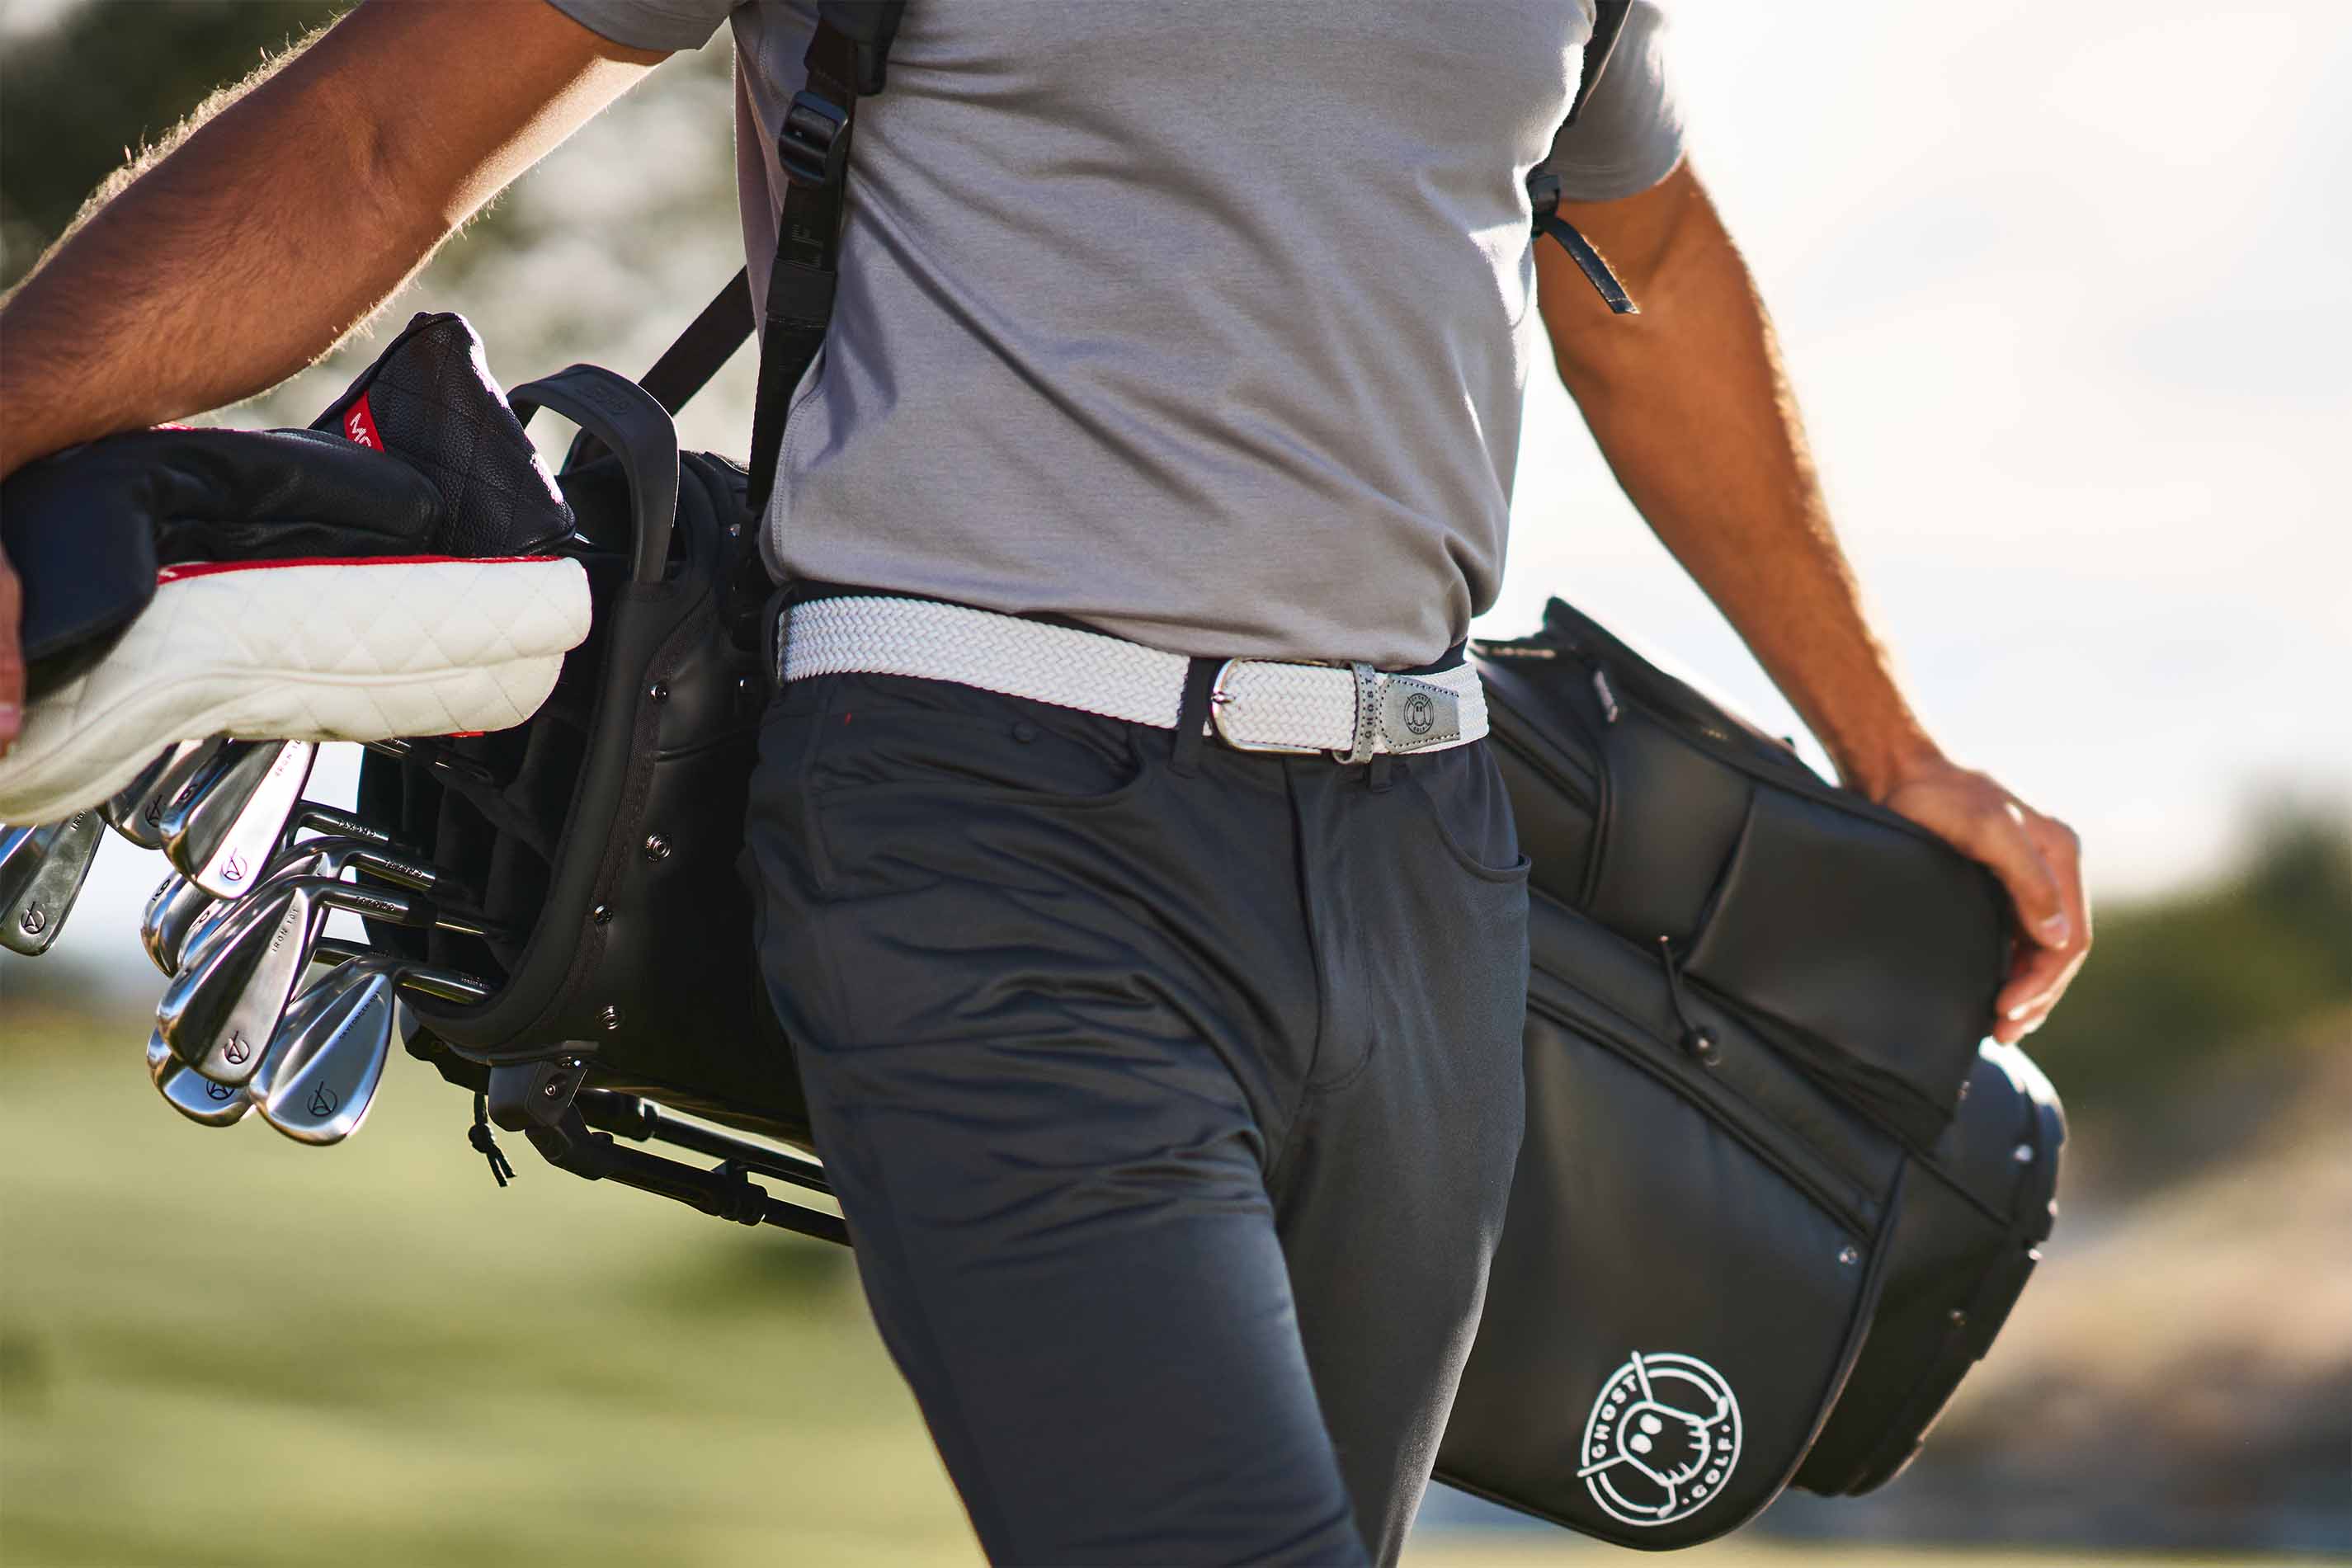 Ghost Golf Club • We Make Game Changing Golf Gear #PlayFearlessly